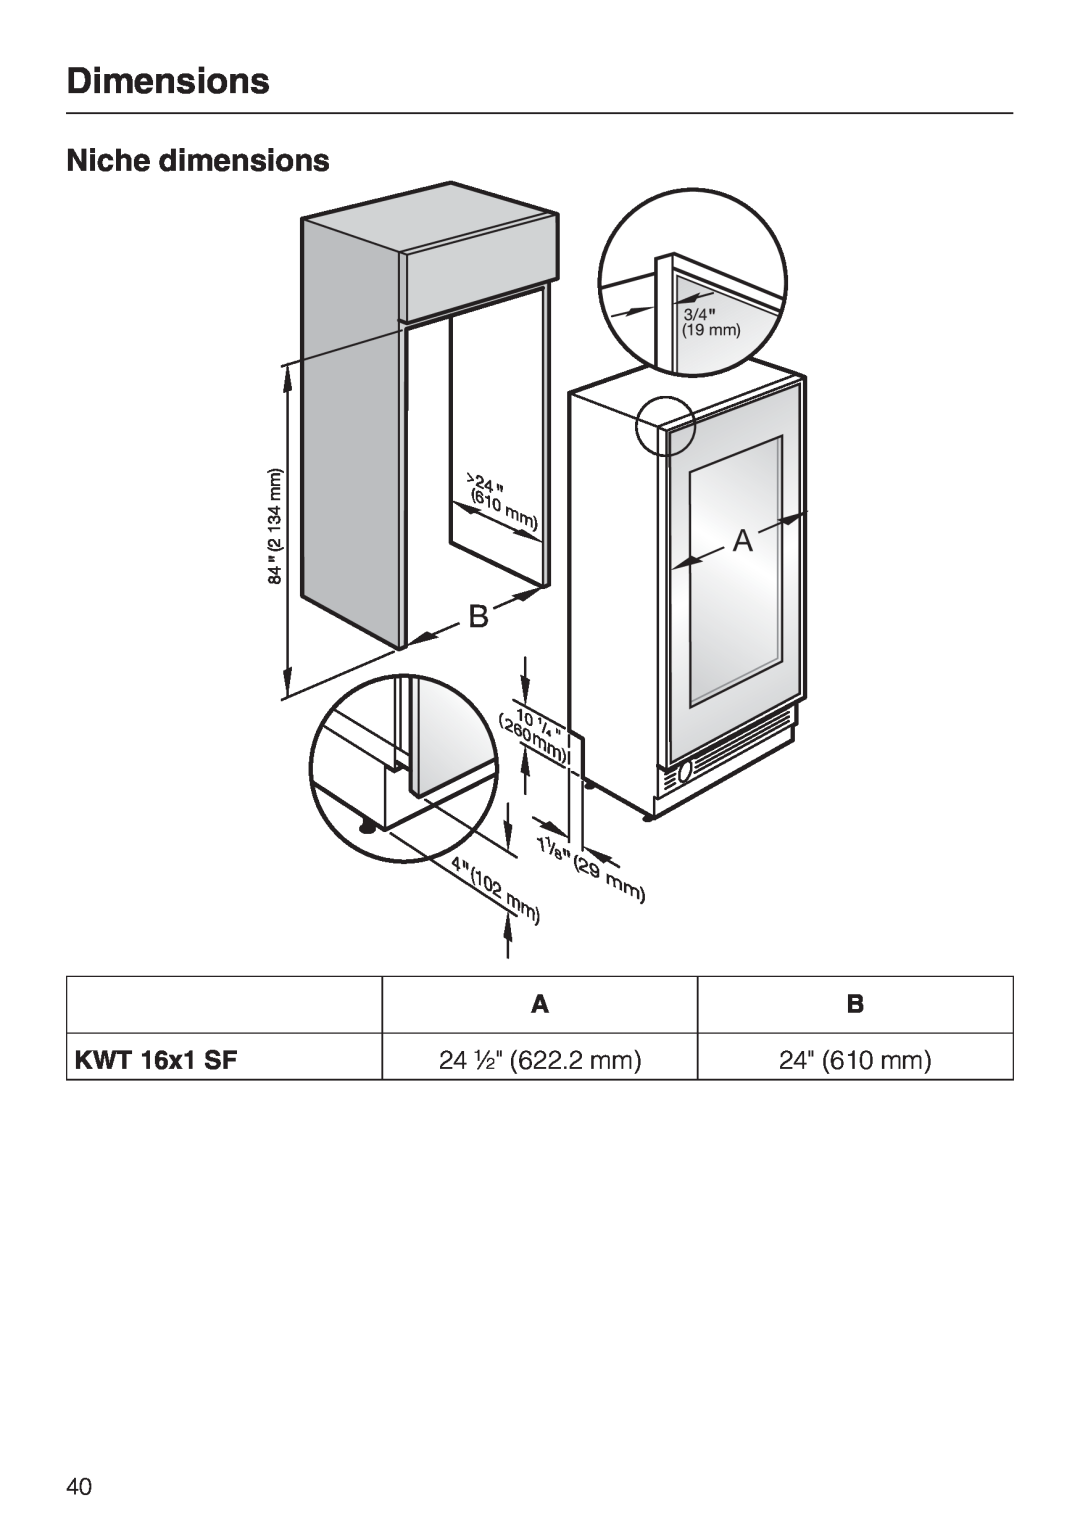 Miele KWT1611SF, KWT1601SF installation instructions Niche dimensions, KWT 16x1 SF, Dimensions 